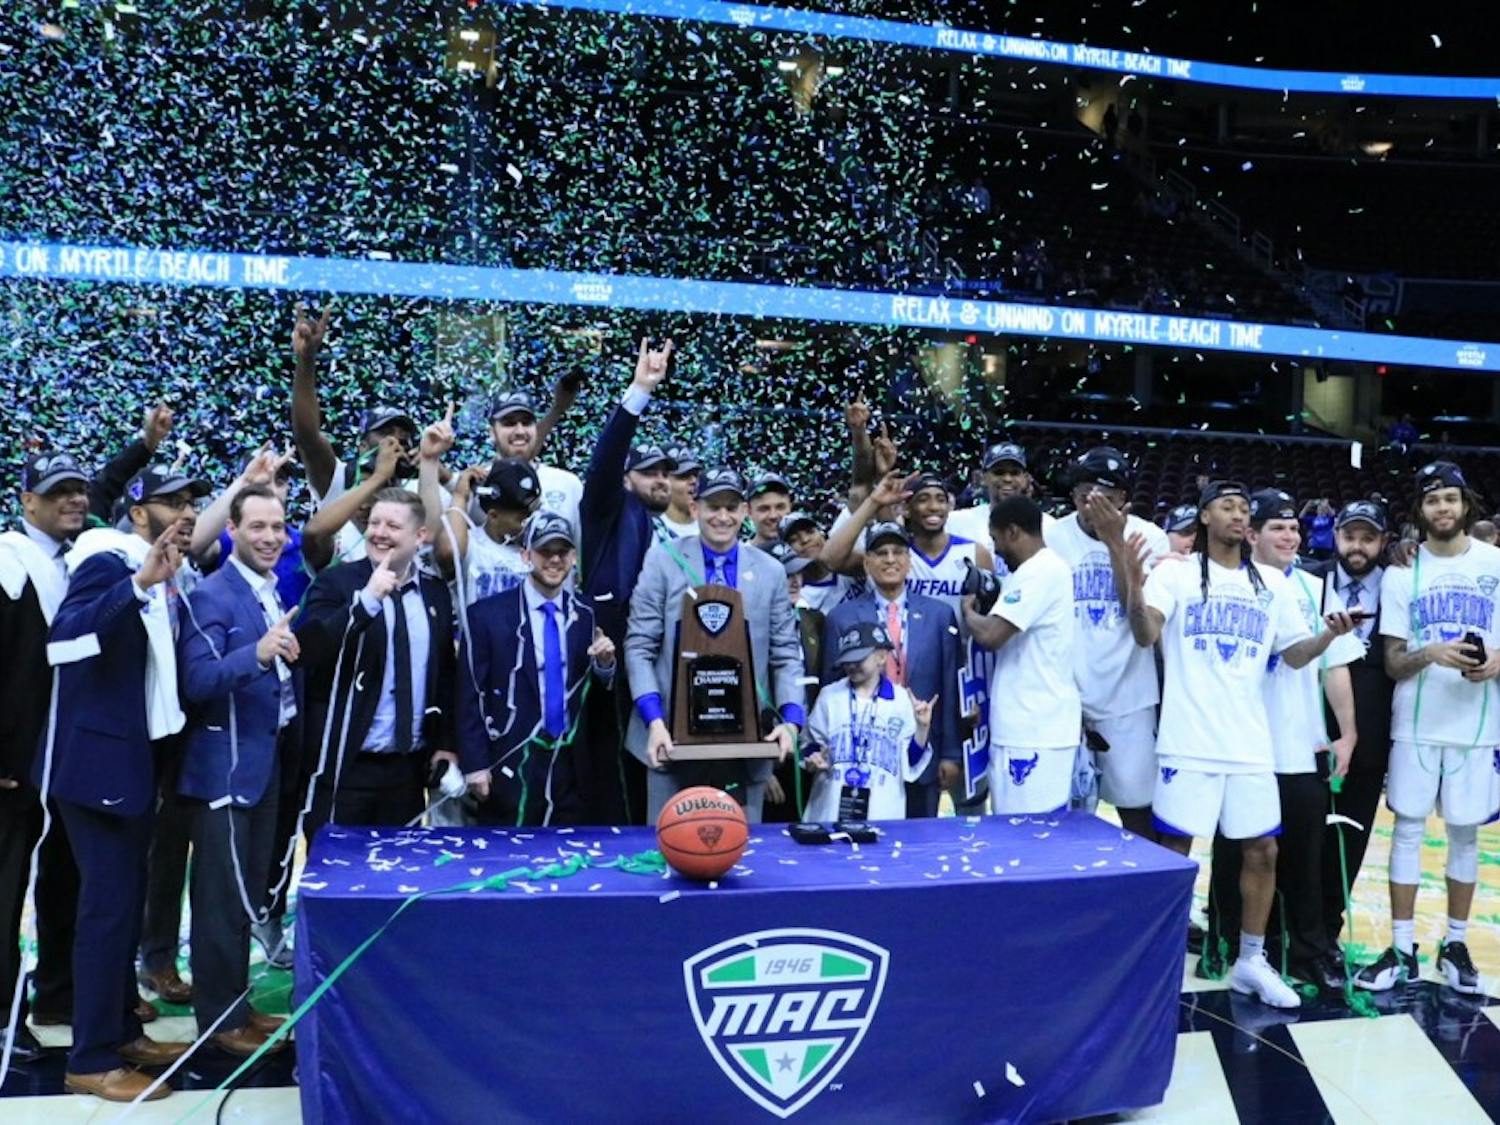 The Bulls celebrate their third Mid-American Conference championship in four years. Head coach Nate Oats wants to build a great program not just a great team.